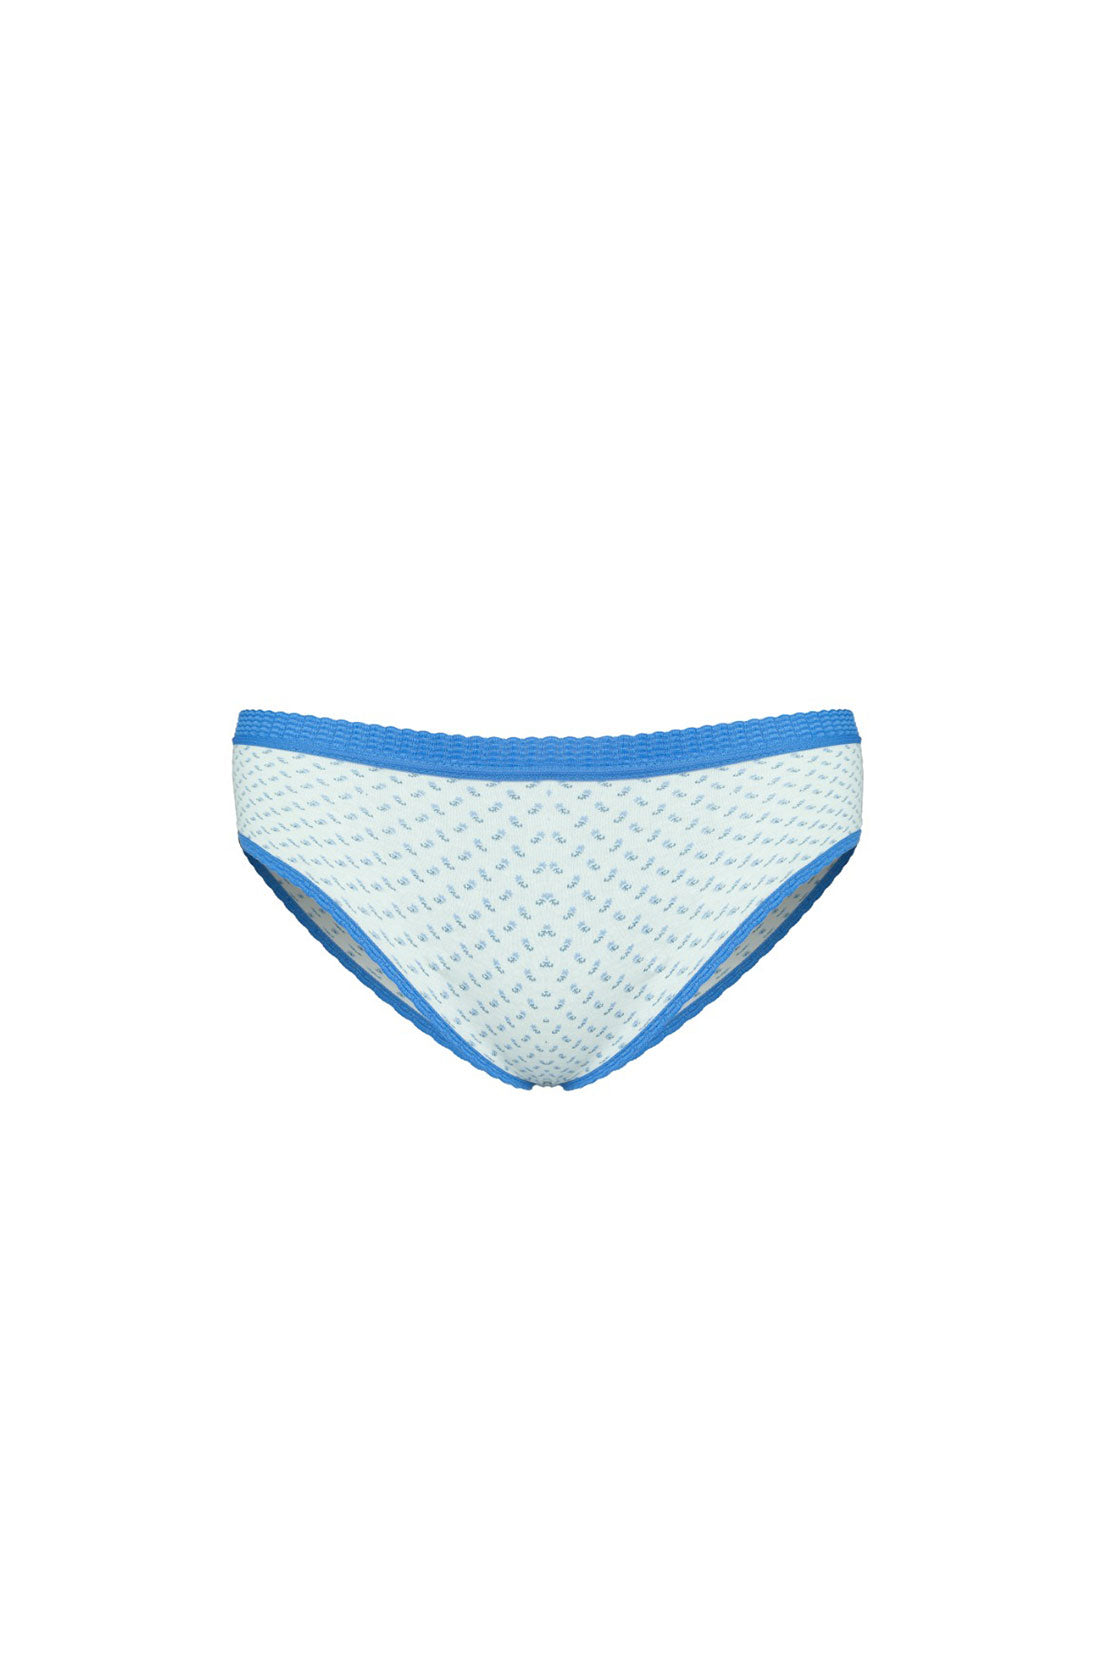 4-Pack Cotton Full Brief Panty RIOS